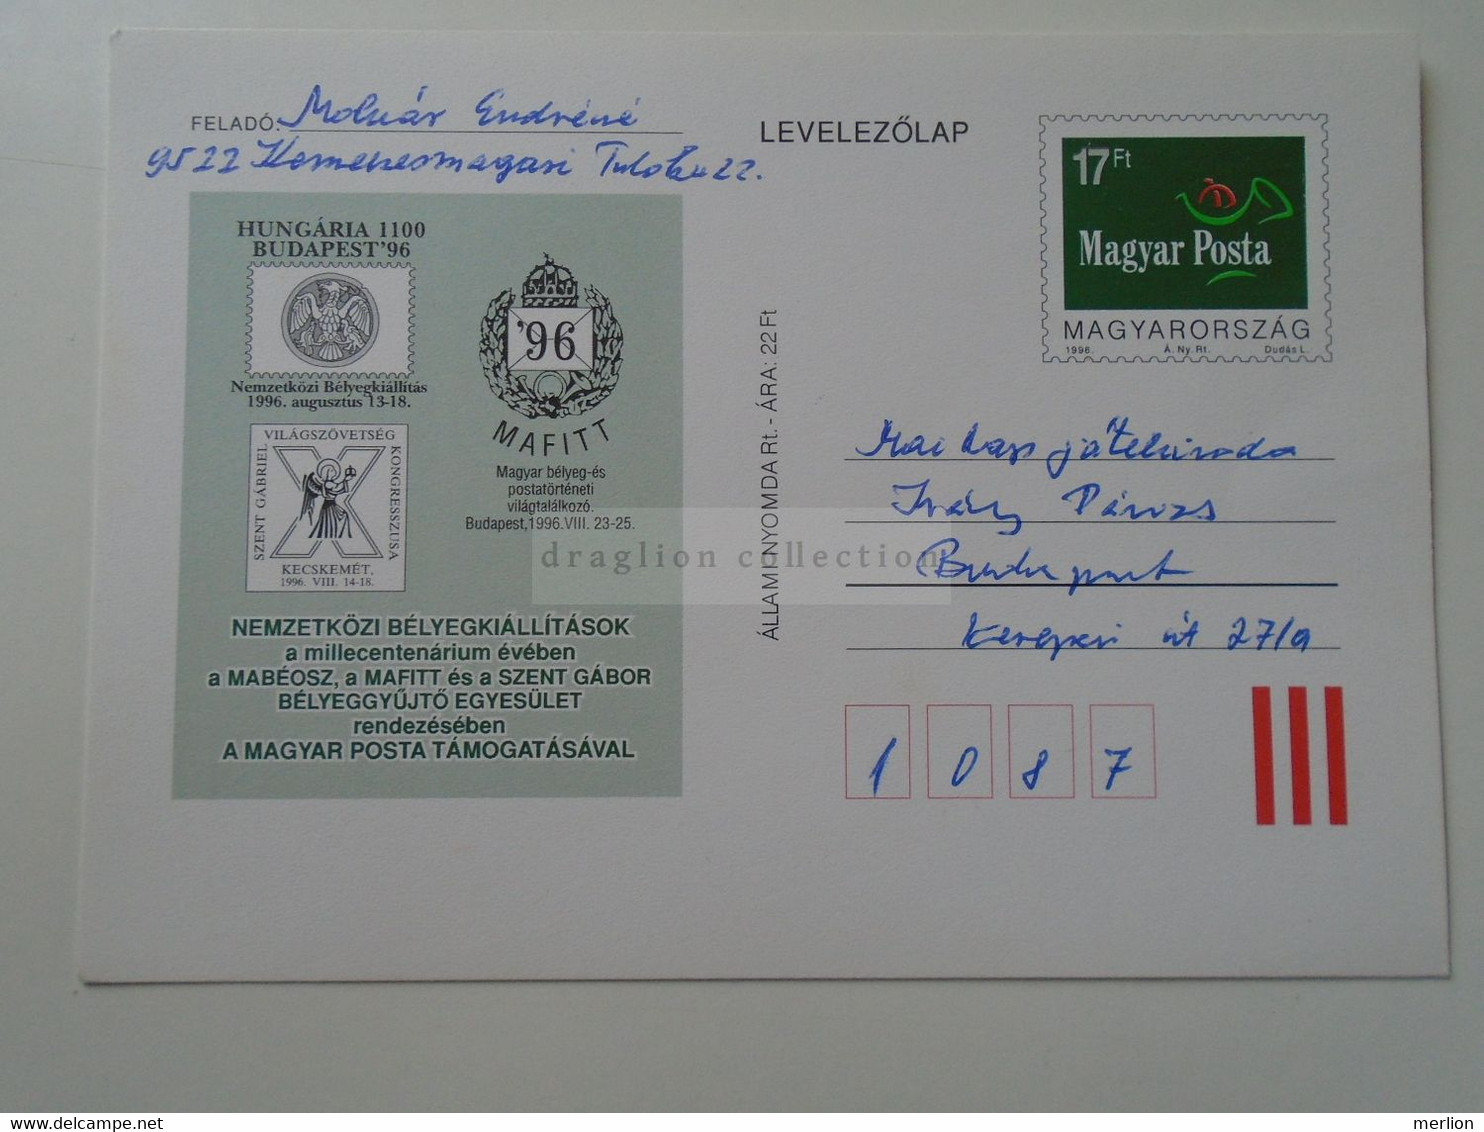 D187103  HUNGARY- Stationery -Postmark  MAGYAR POSTA -Hungarian Post - Philatelic Exhibitions 1996 - Postmark Collection